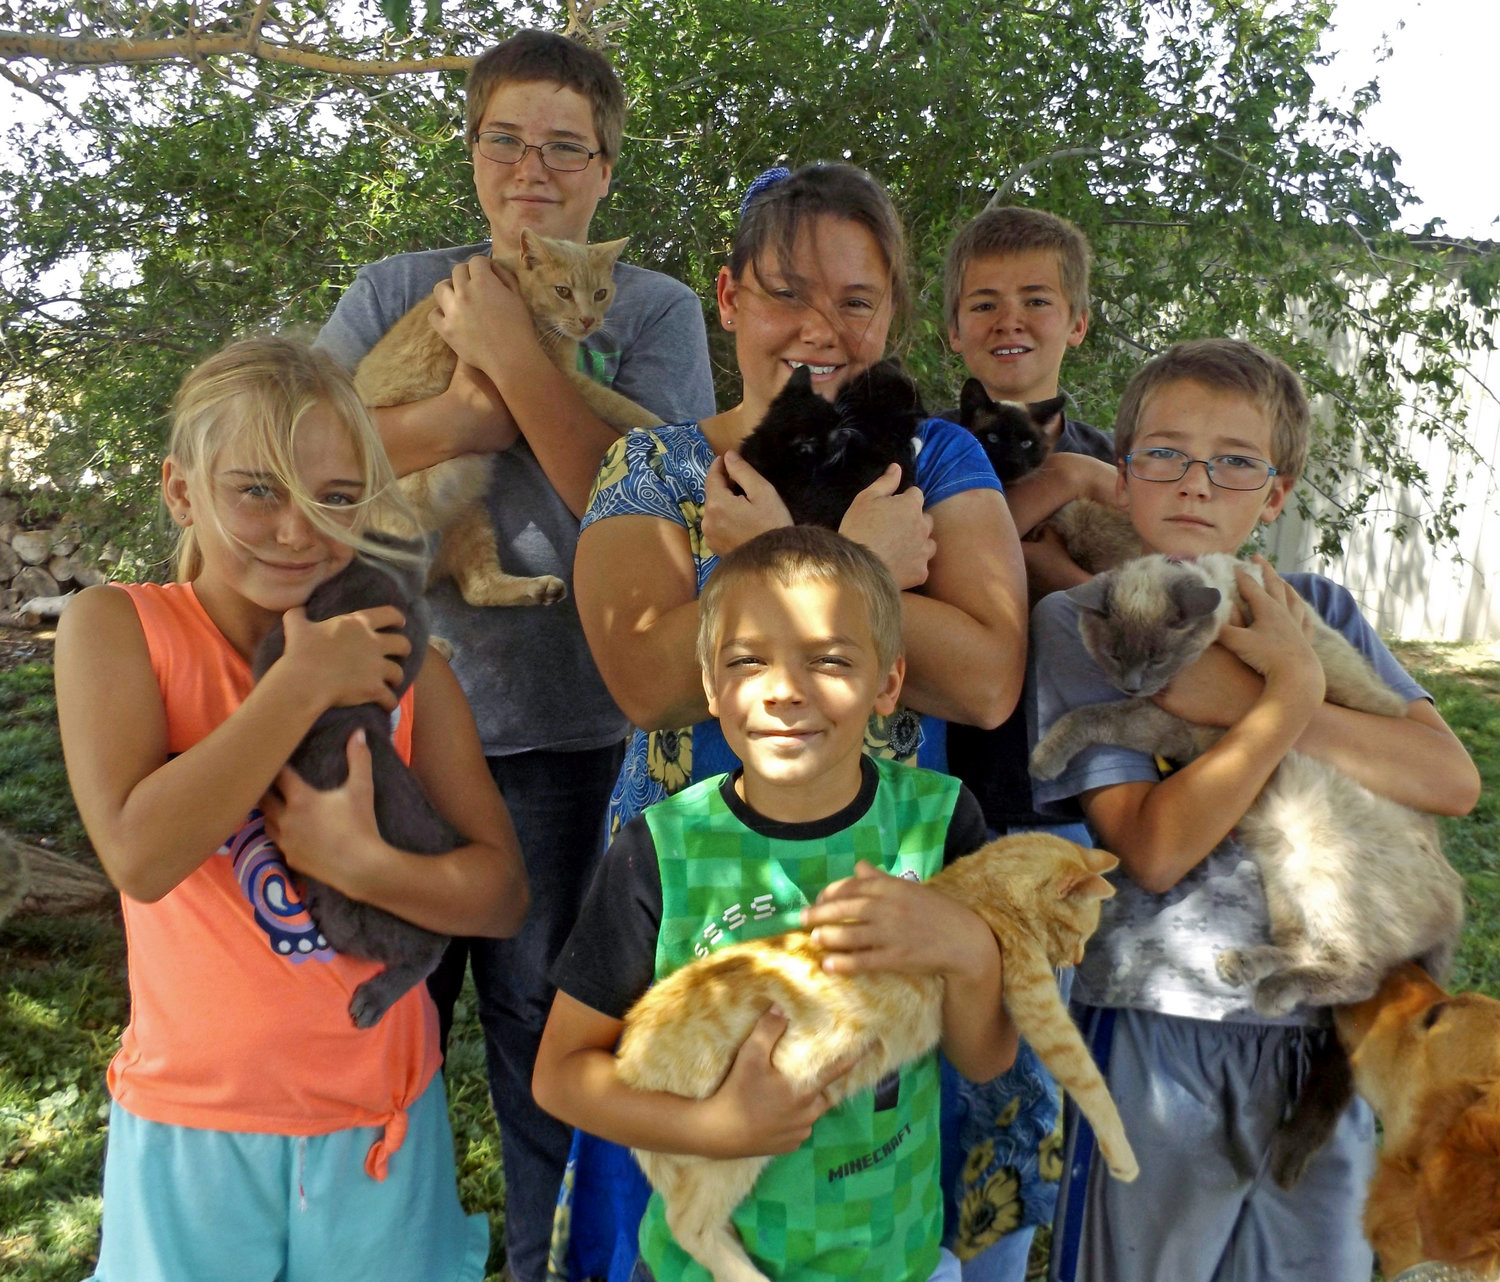 Steffanie Mininger and family Priscilla, 10; Luke, 14; Steffanie; Ben, 12; Doug, 11; and Isaac, 9, are part of a network of rescue families who care for homeless cats, kittens both domesticated and feral.